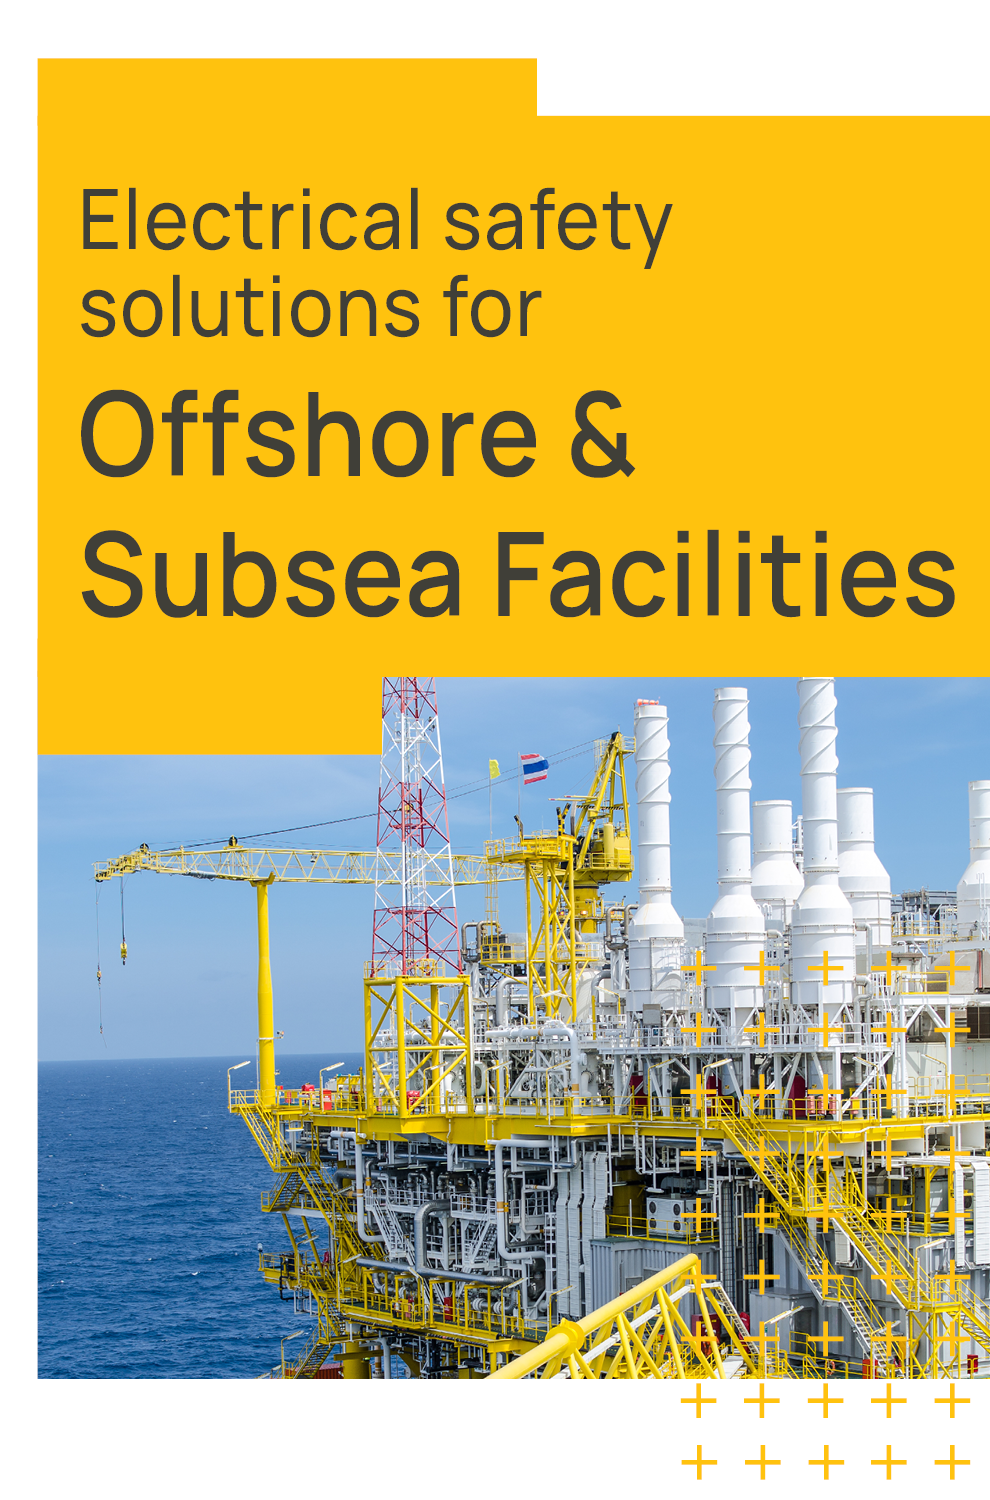 Offshore & Subsea Facilities